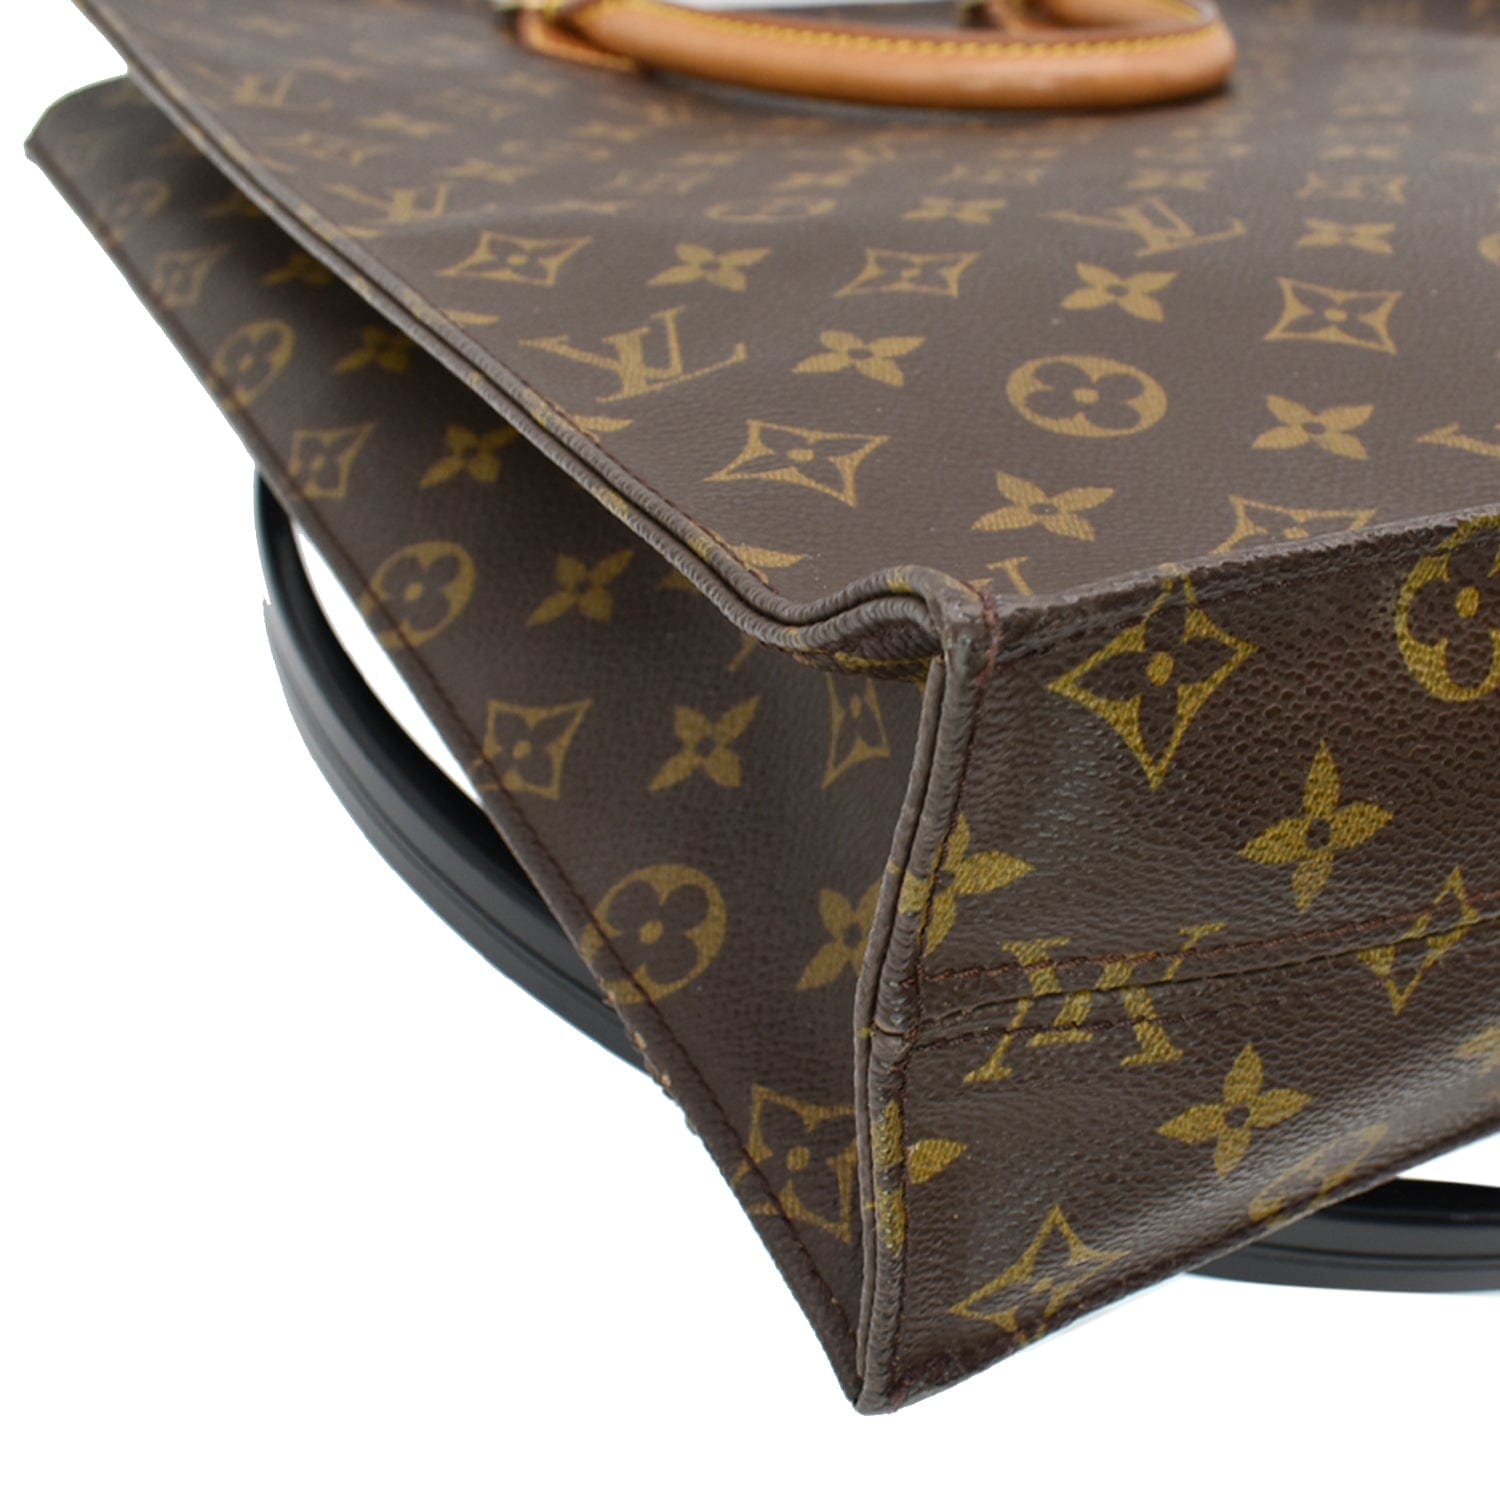 Louis Vuitton Pre-Owned Sac Plat Tote Bag - Brown for Women